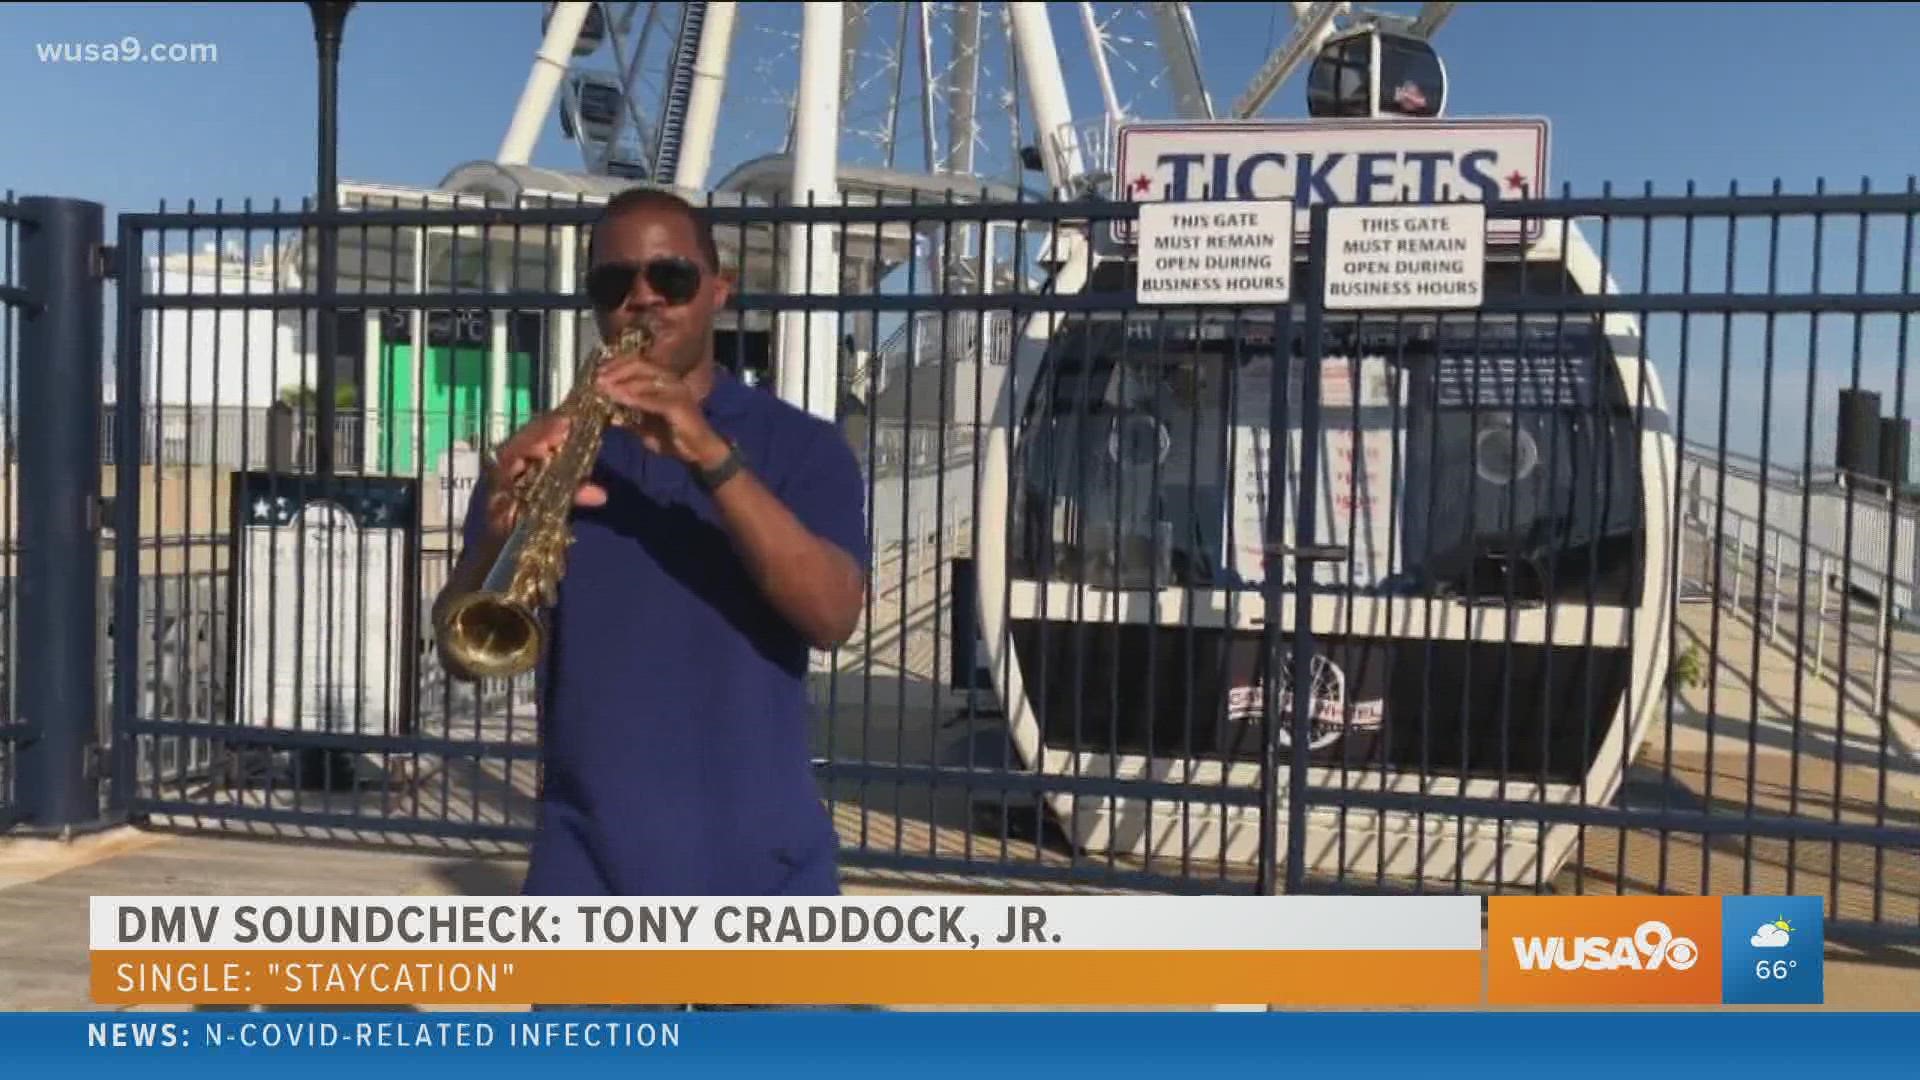 Tony Craddock, Jr. is a meteorologist and musician who's hosting a music festival called Cold Front Music Festival on Friday October 22nd.